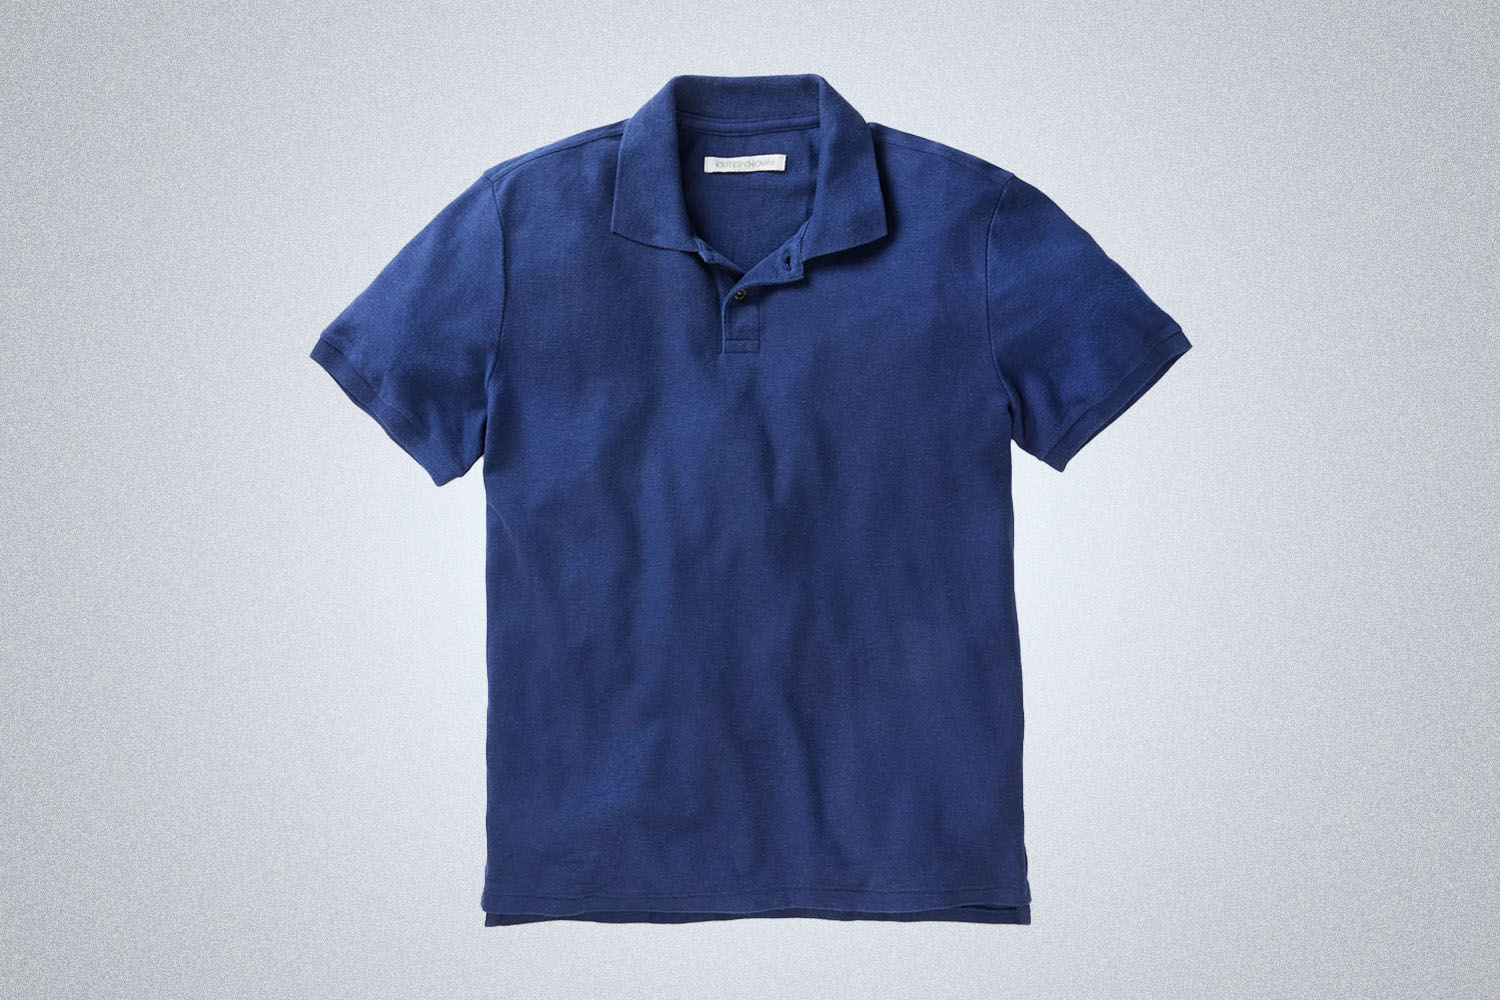 a blue polo from Outerknown on a grey background